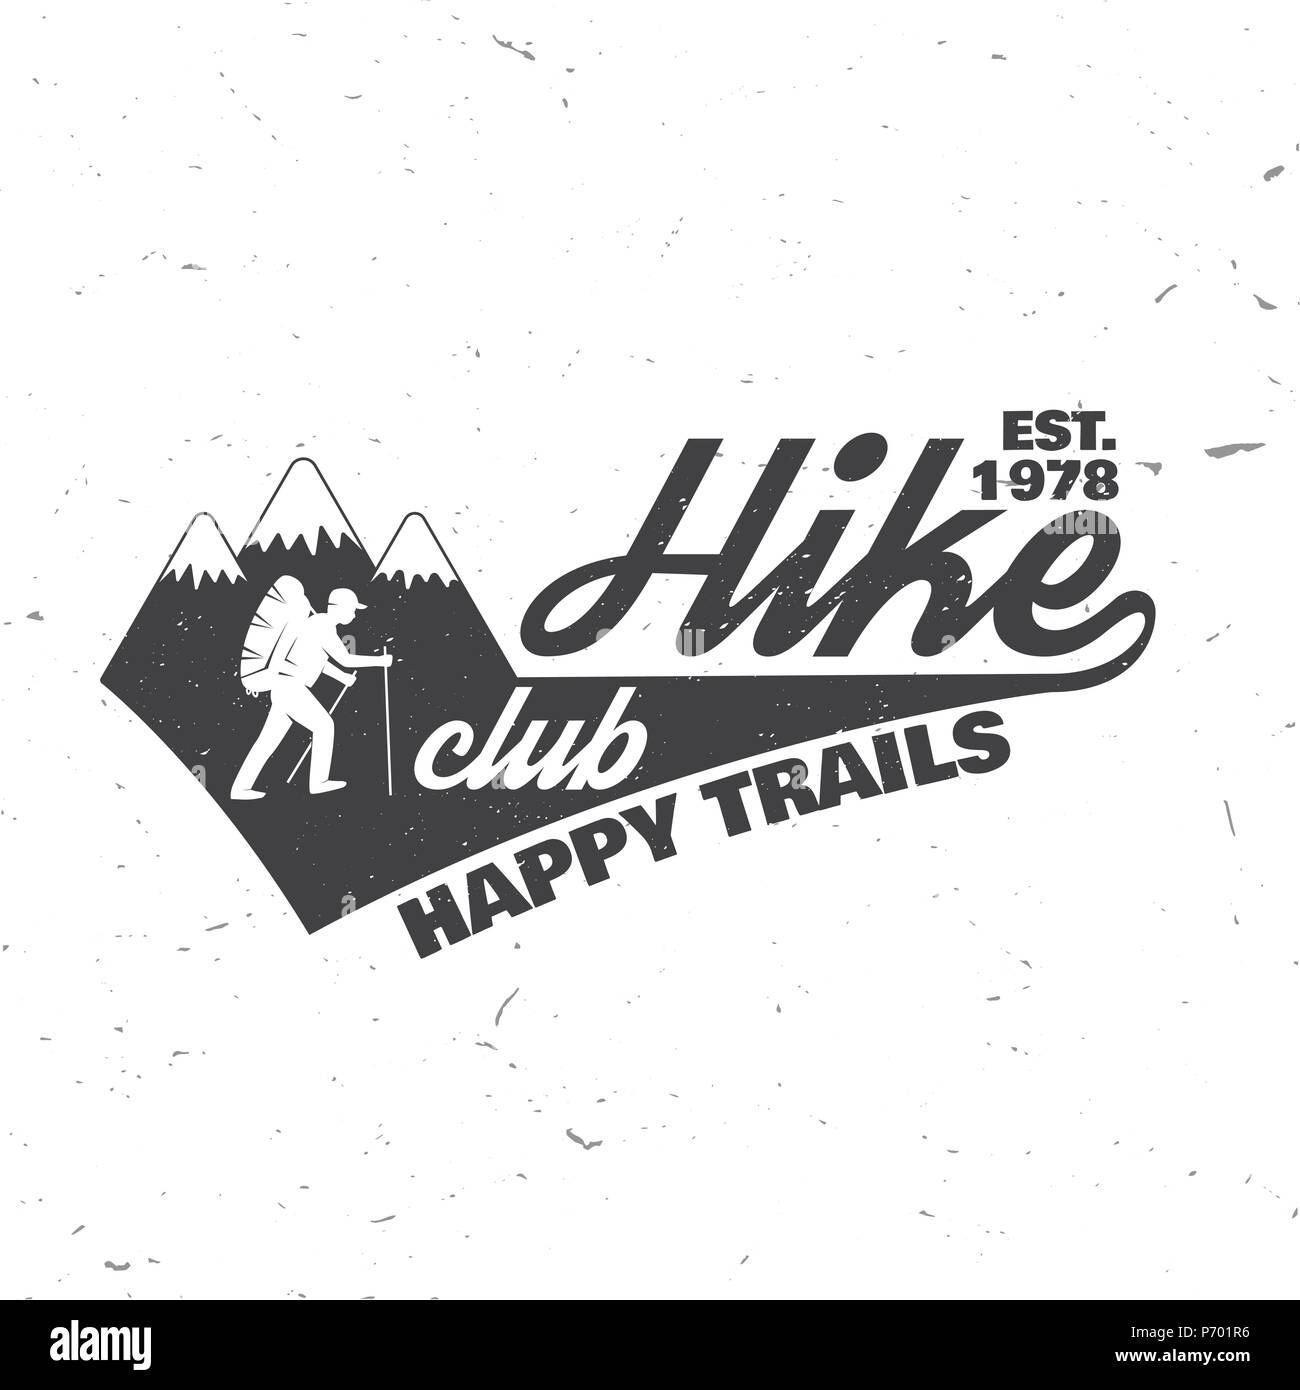 Hike club Happy trails. Vector illustration. Concept for shirt or logo, print, stamp. Design with hiker on the mountains. Stock Vector